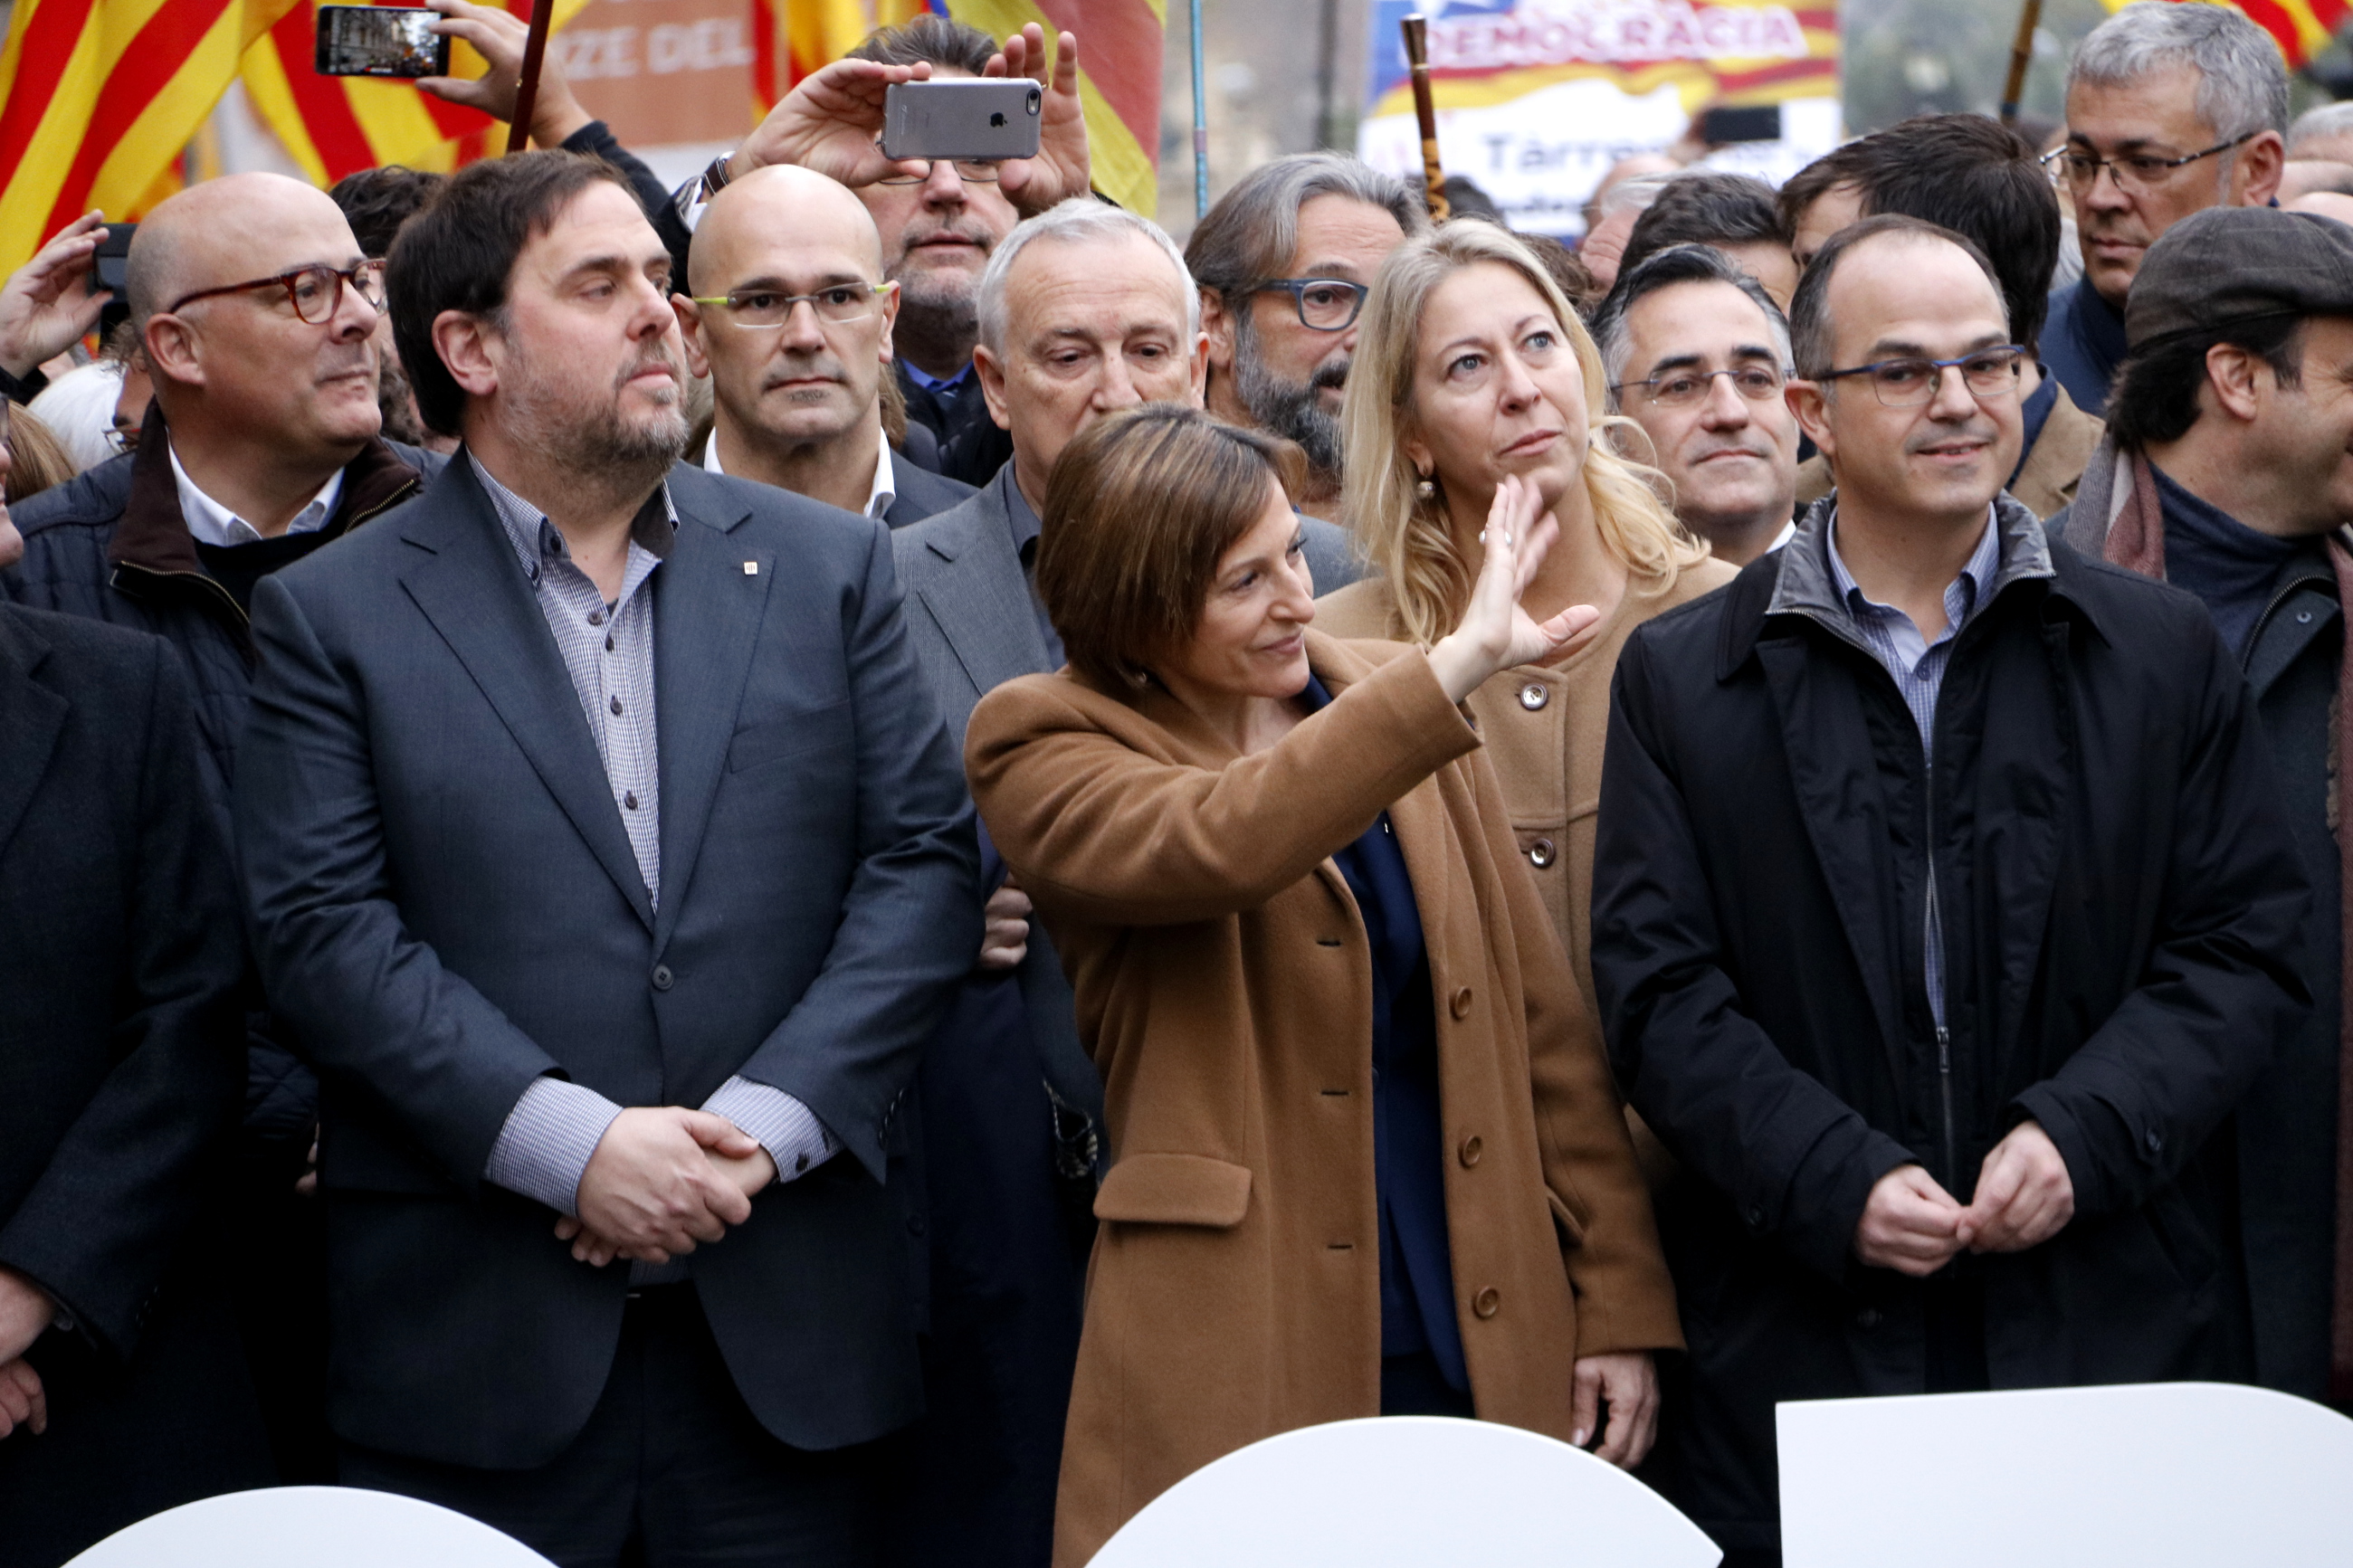 Parliament's President, Carme Forcadell, rallied around by the Catalan Government, politicians and civil society on her arrival at Barcelona's Courthouse (by ACN)